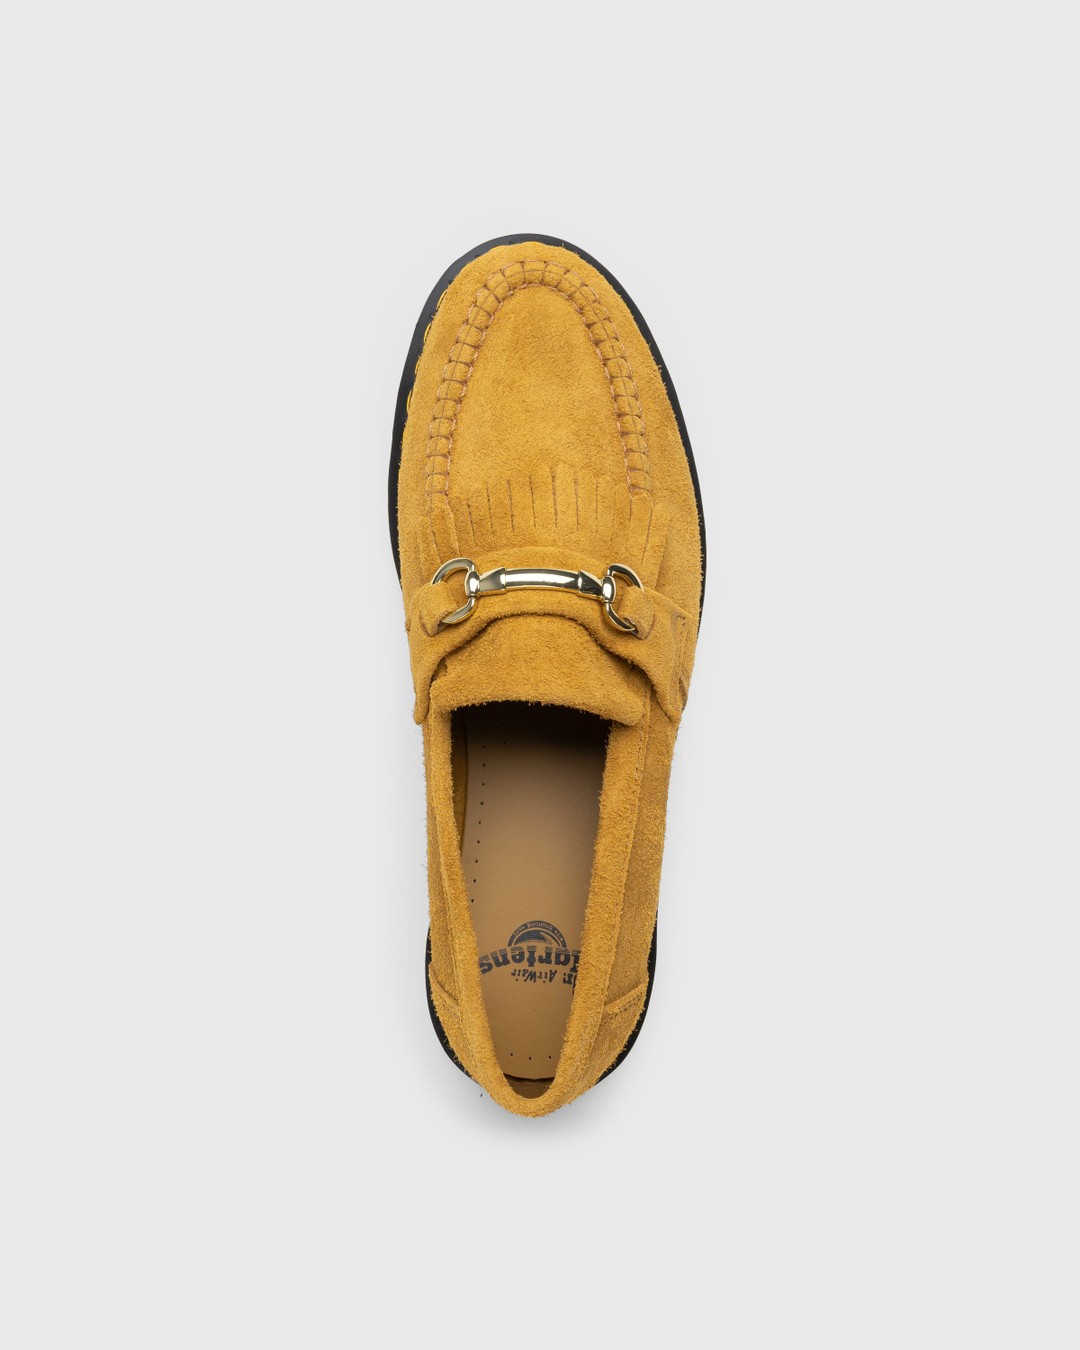 Dr. Martens – Adrian Snaffle Suede Loafers Light Tan Desert Oasis Suede (Gum Oil) - Loafers - Brown - Image 5